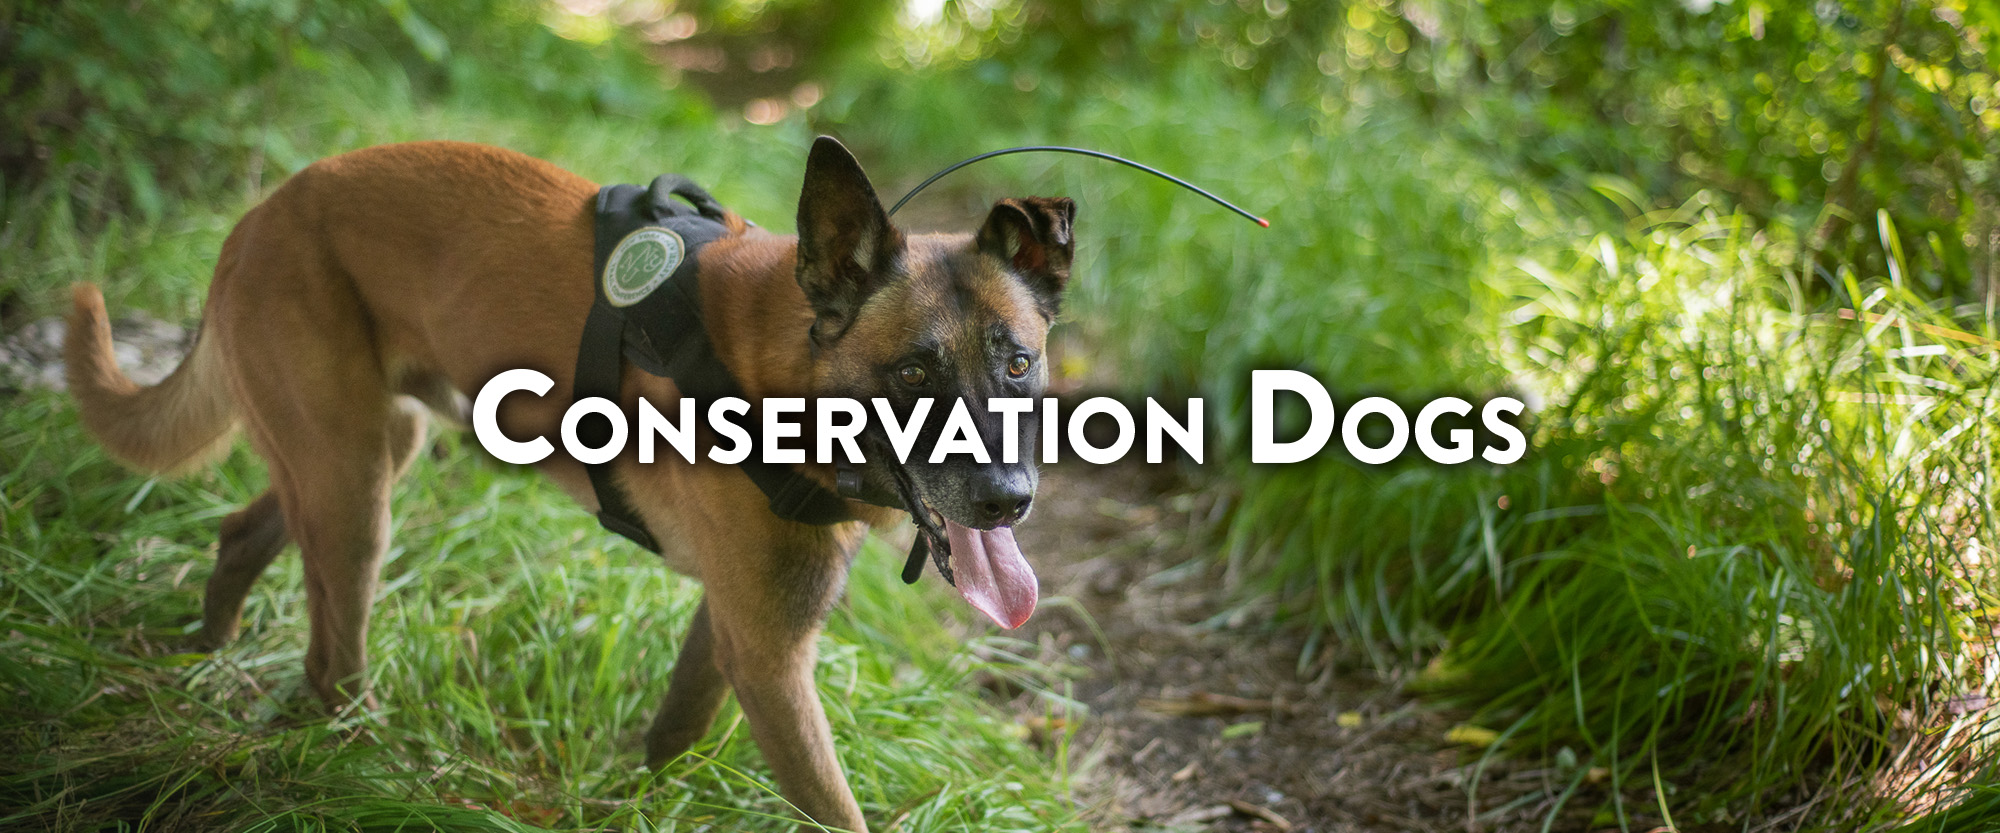 Conservation Dogs